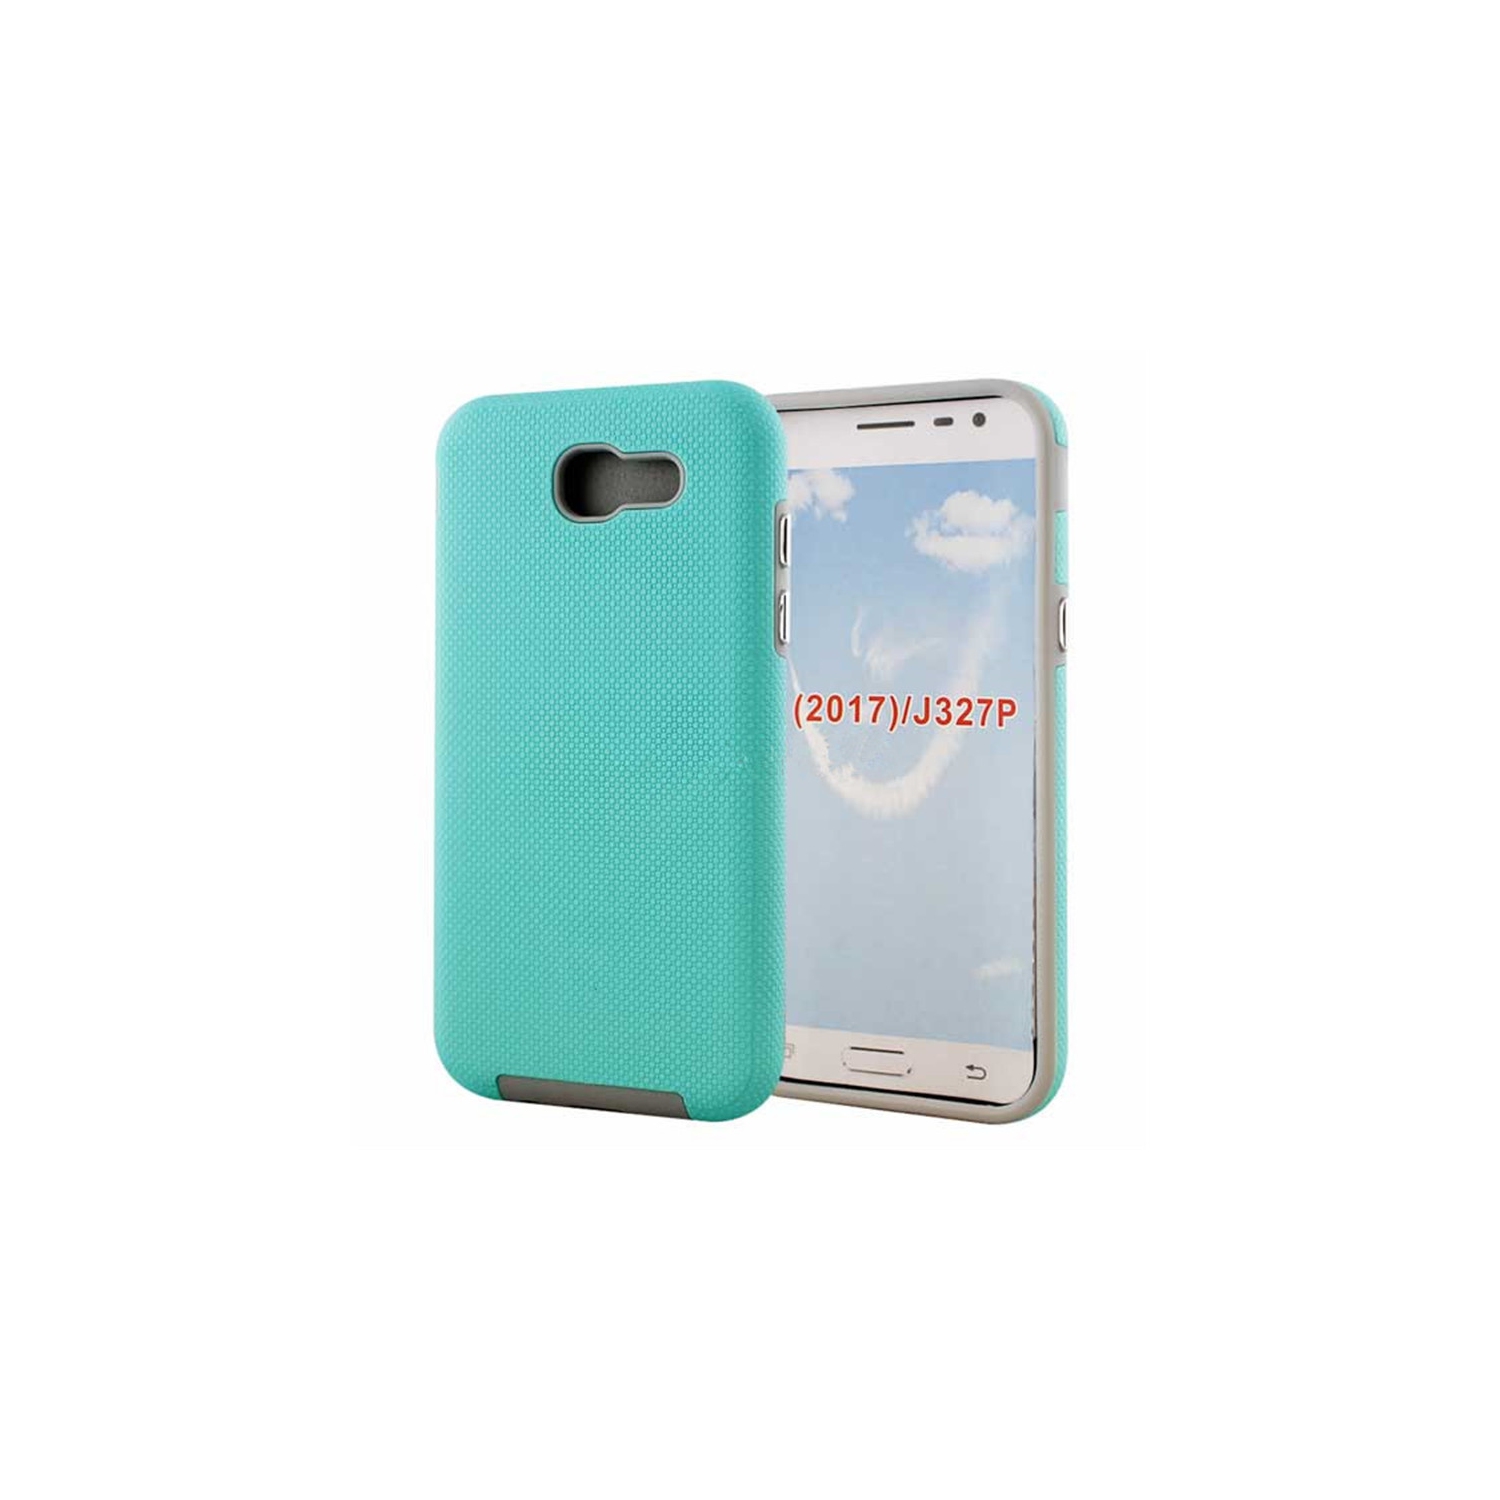 【CSmart】 Slim Fitted Hybrid Hard PC Shell Shockproof Scratch Resistant Case Cover for Samsung Galaxy J3 Prime 2017, Mint